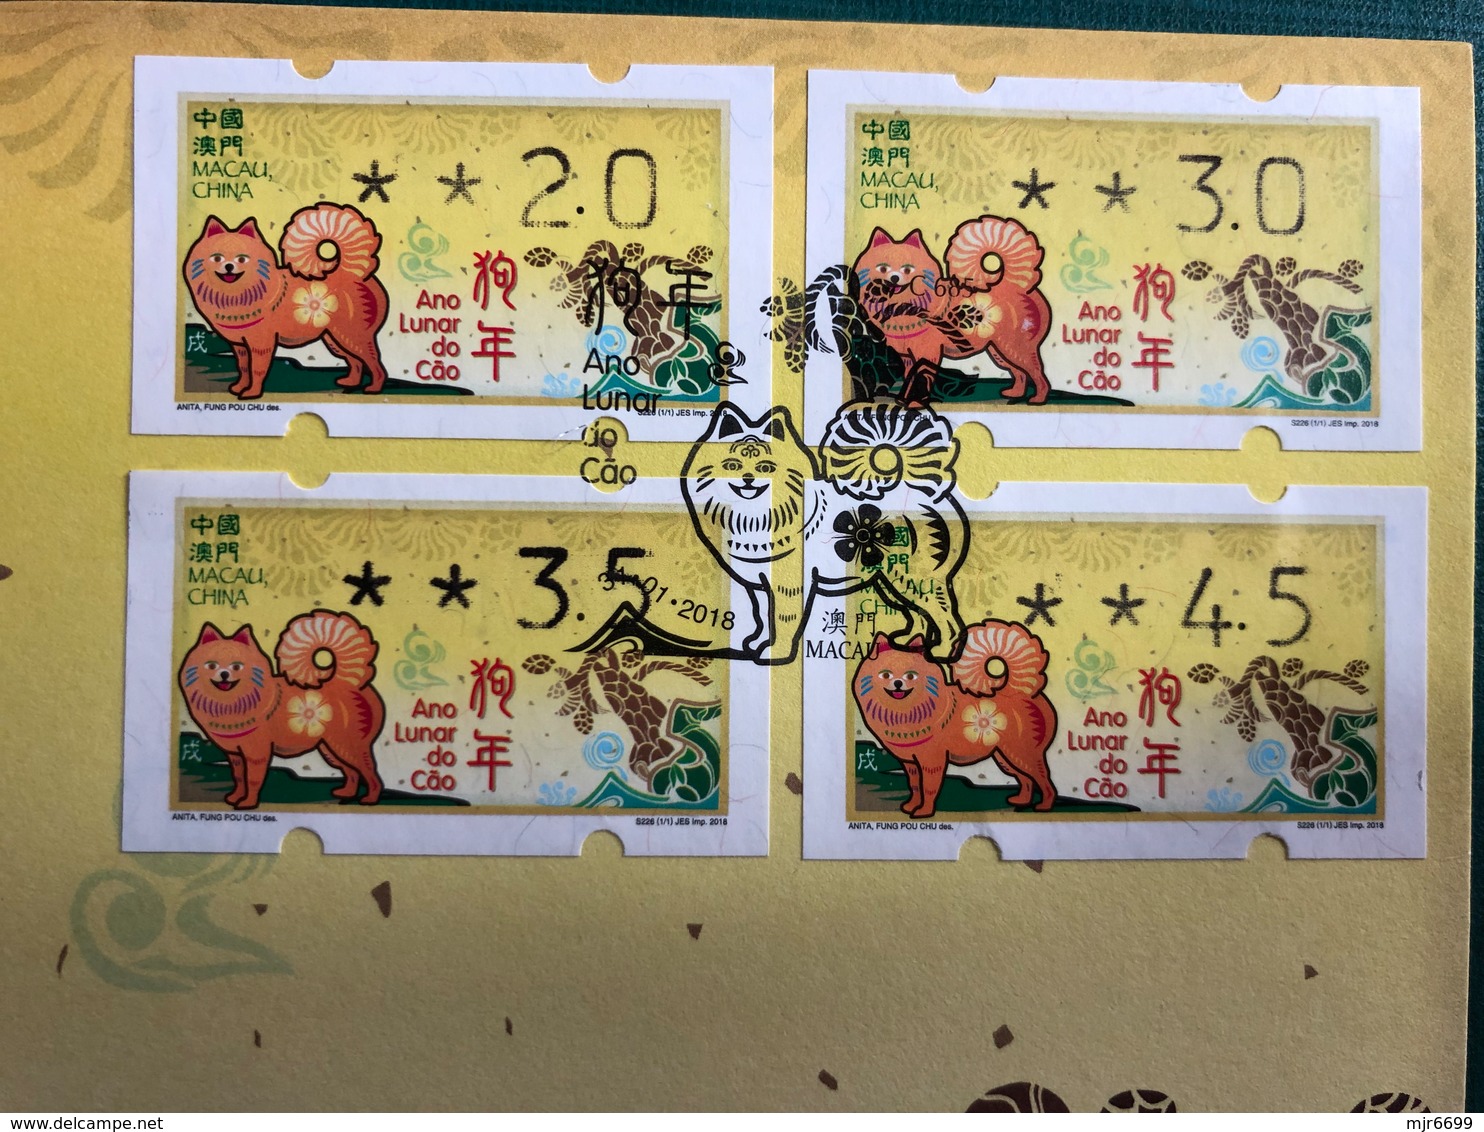 MACAU, 2018 ATM LABELS CHINESE ZODIAC YEAR OF THE DOG COMPLETE SET IN FDC - FDC